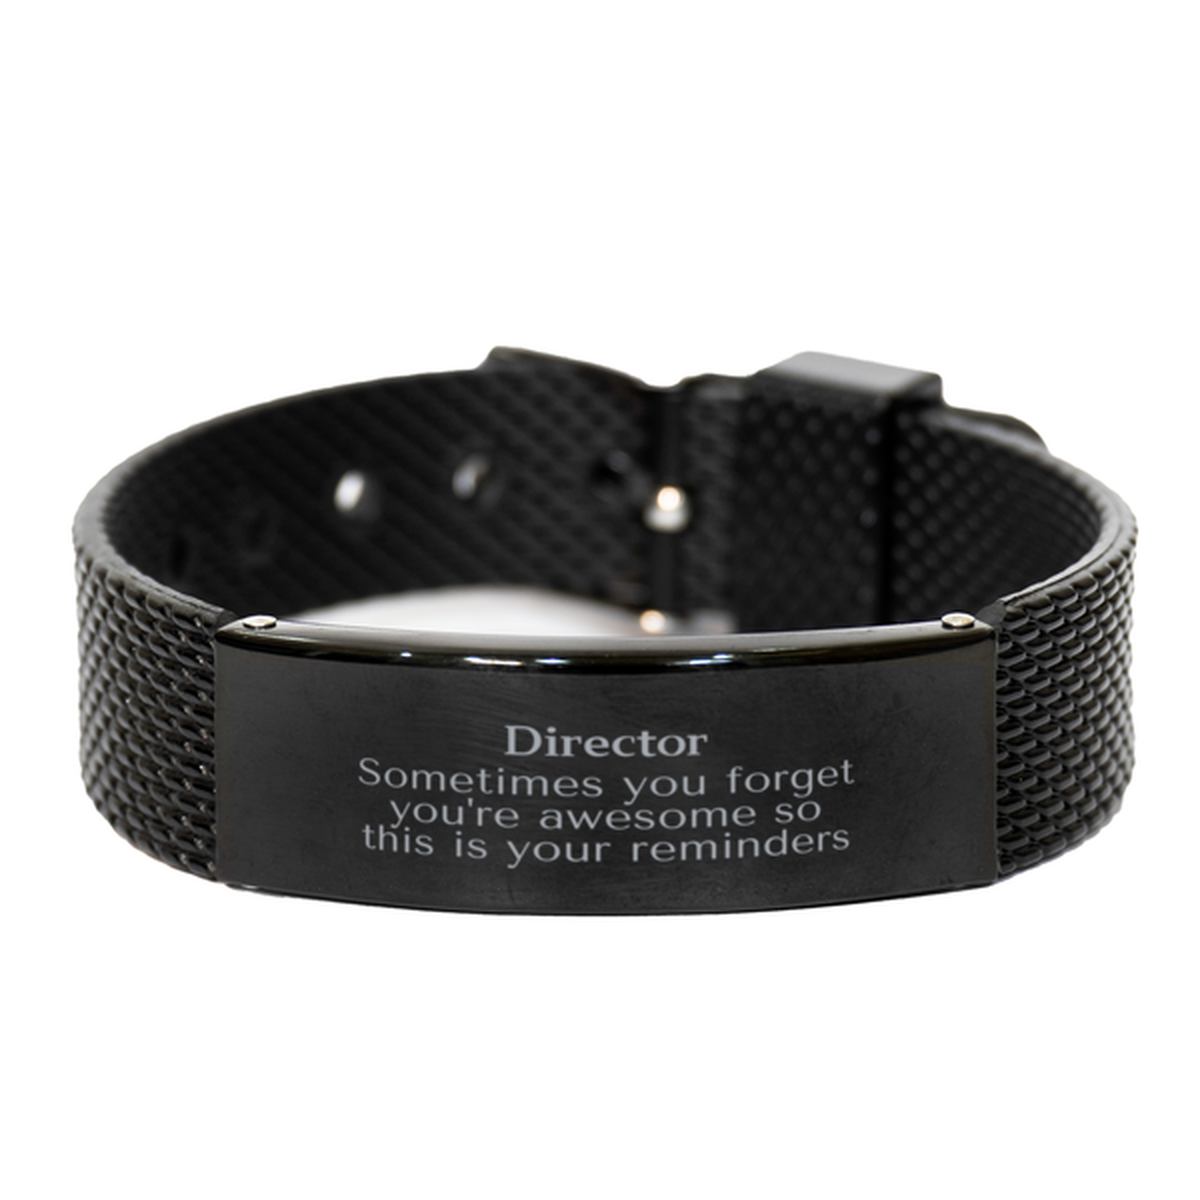 Sentimental Director Black Shark Mesh Bracelet, Director Sometimes you forget you're awesome so this is your reminders, Graduation Christmas Birthday Gifts for Director, Men, Women, Coworkers